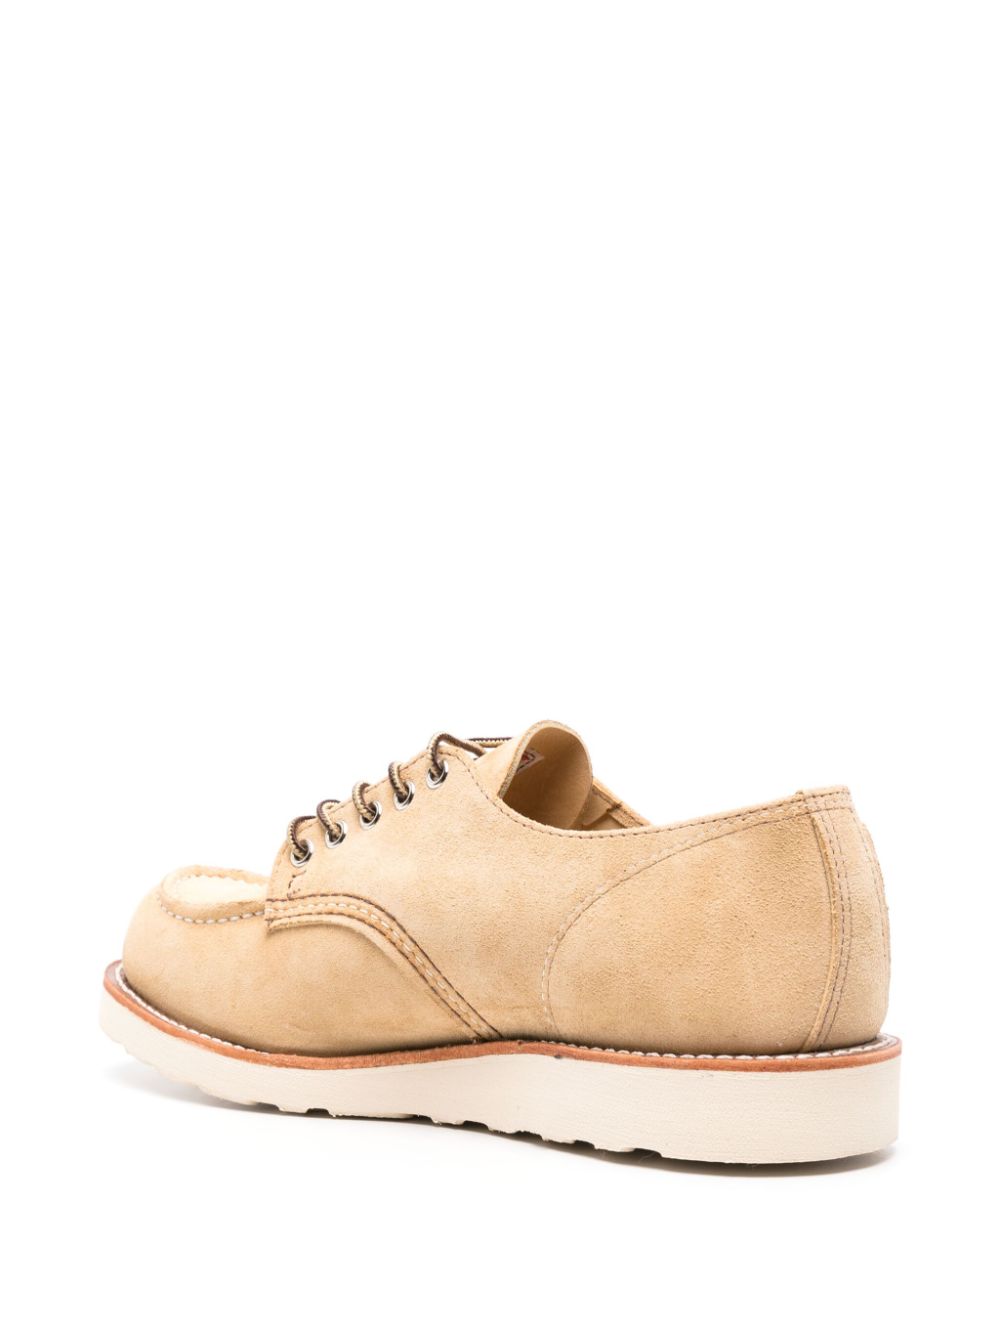 RED WING SHOES RED WING SHOES- Moc Oxford Leather Brogues